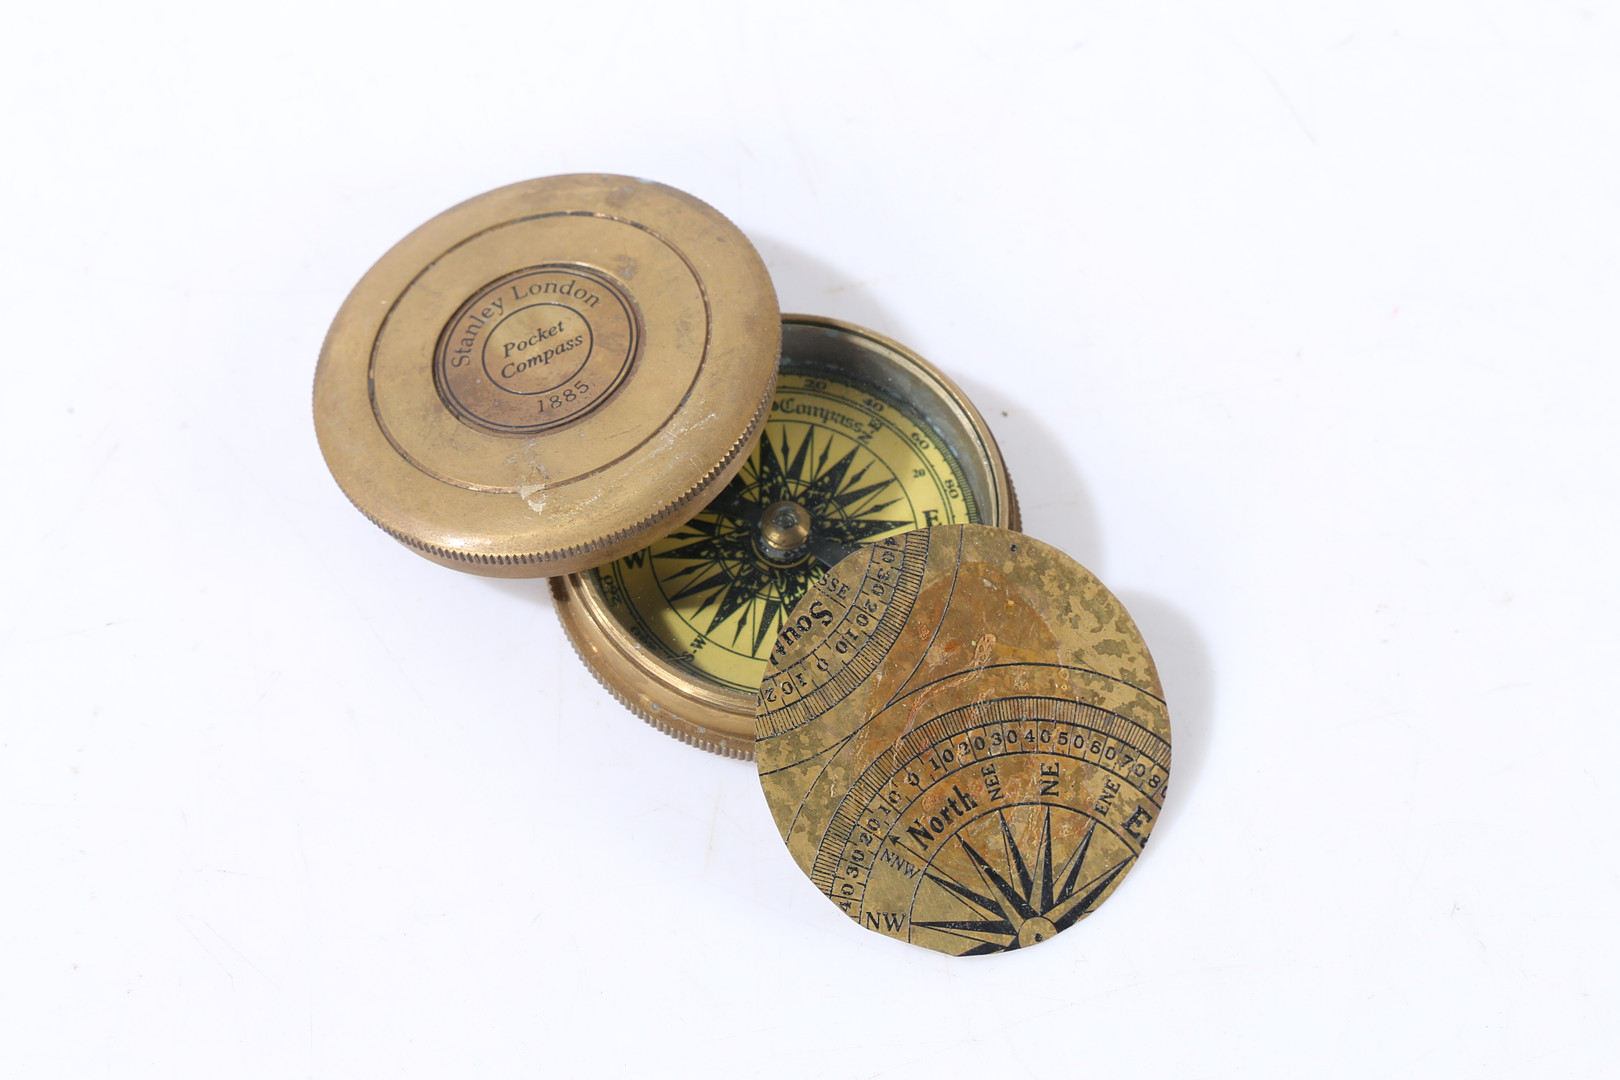 A STANLEY LONDON POCKET COMPASS 1885. - Image 5 of 6